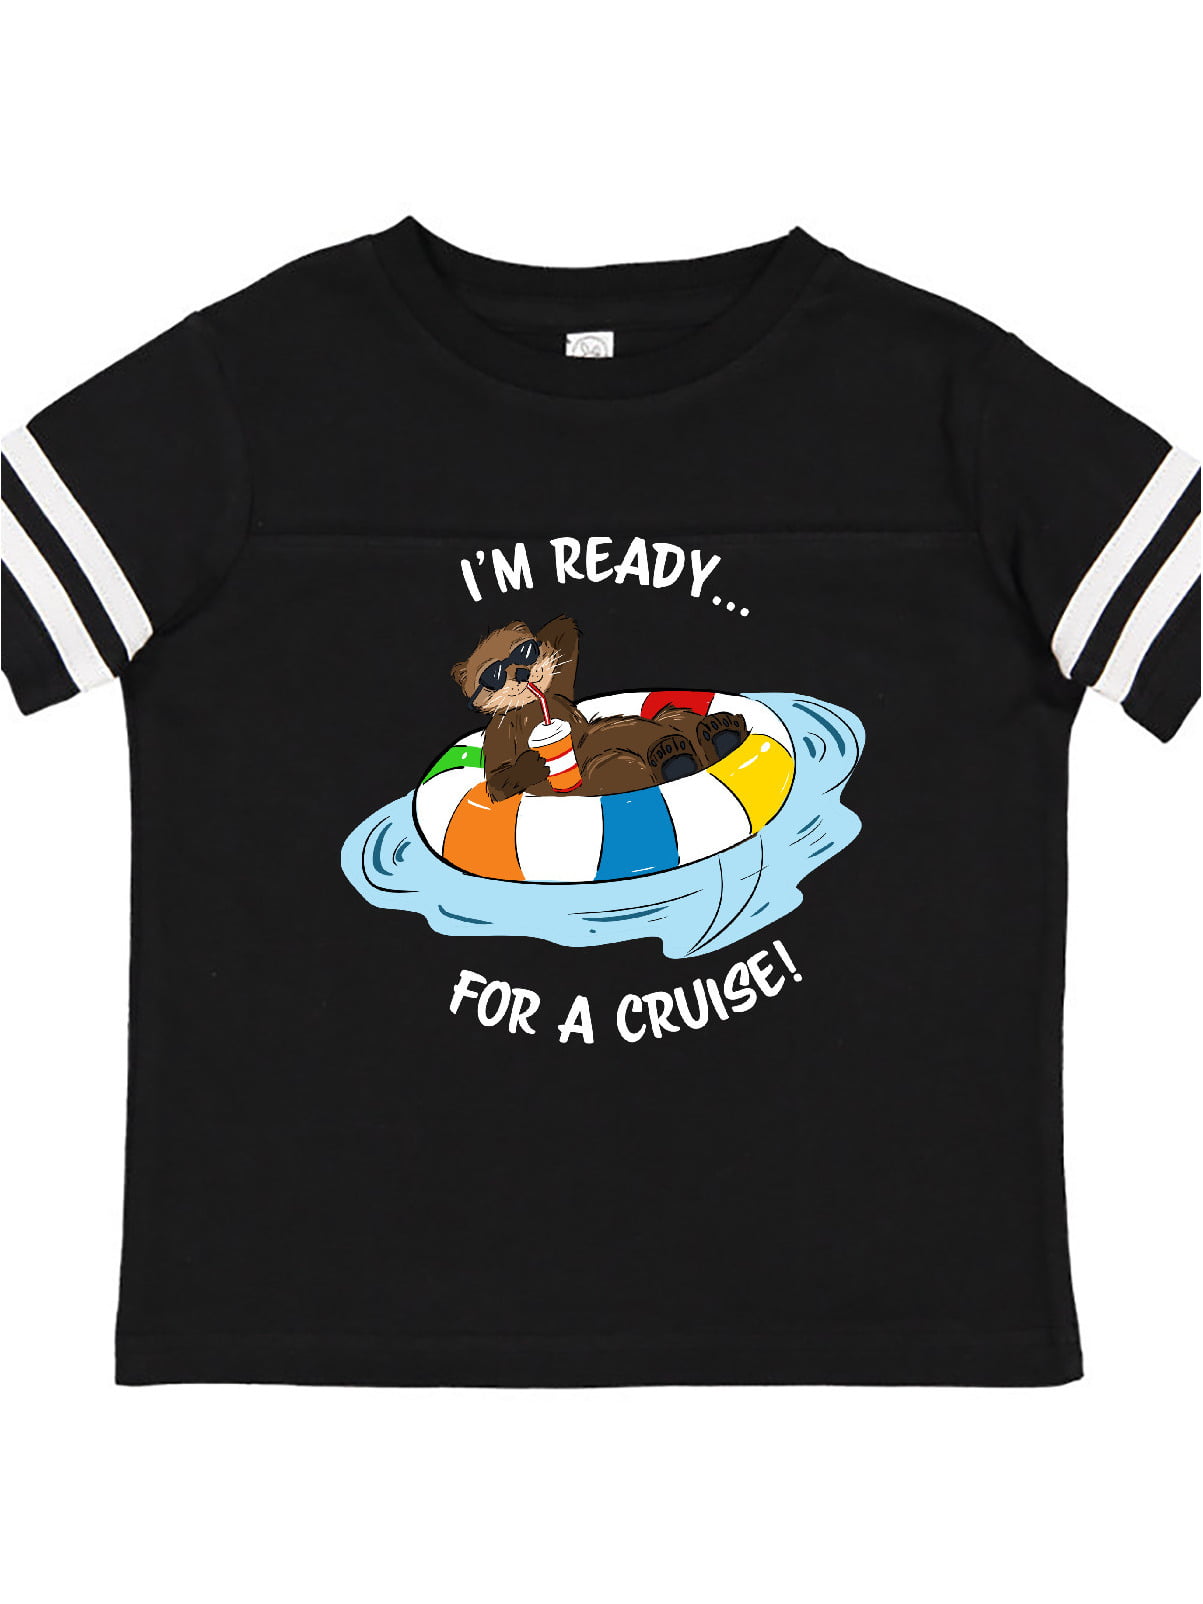 Im Going On A Cruise with My Pawpaw Toddler/Kids Raglan T-Shirt Pack My Stuff 